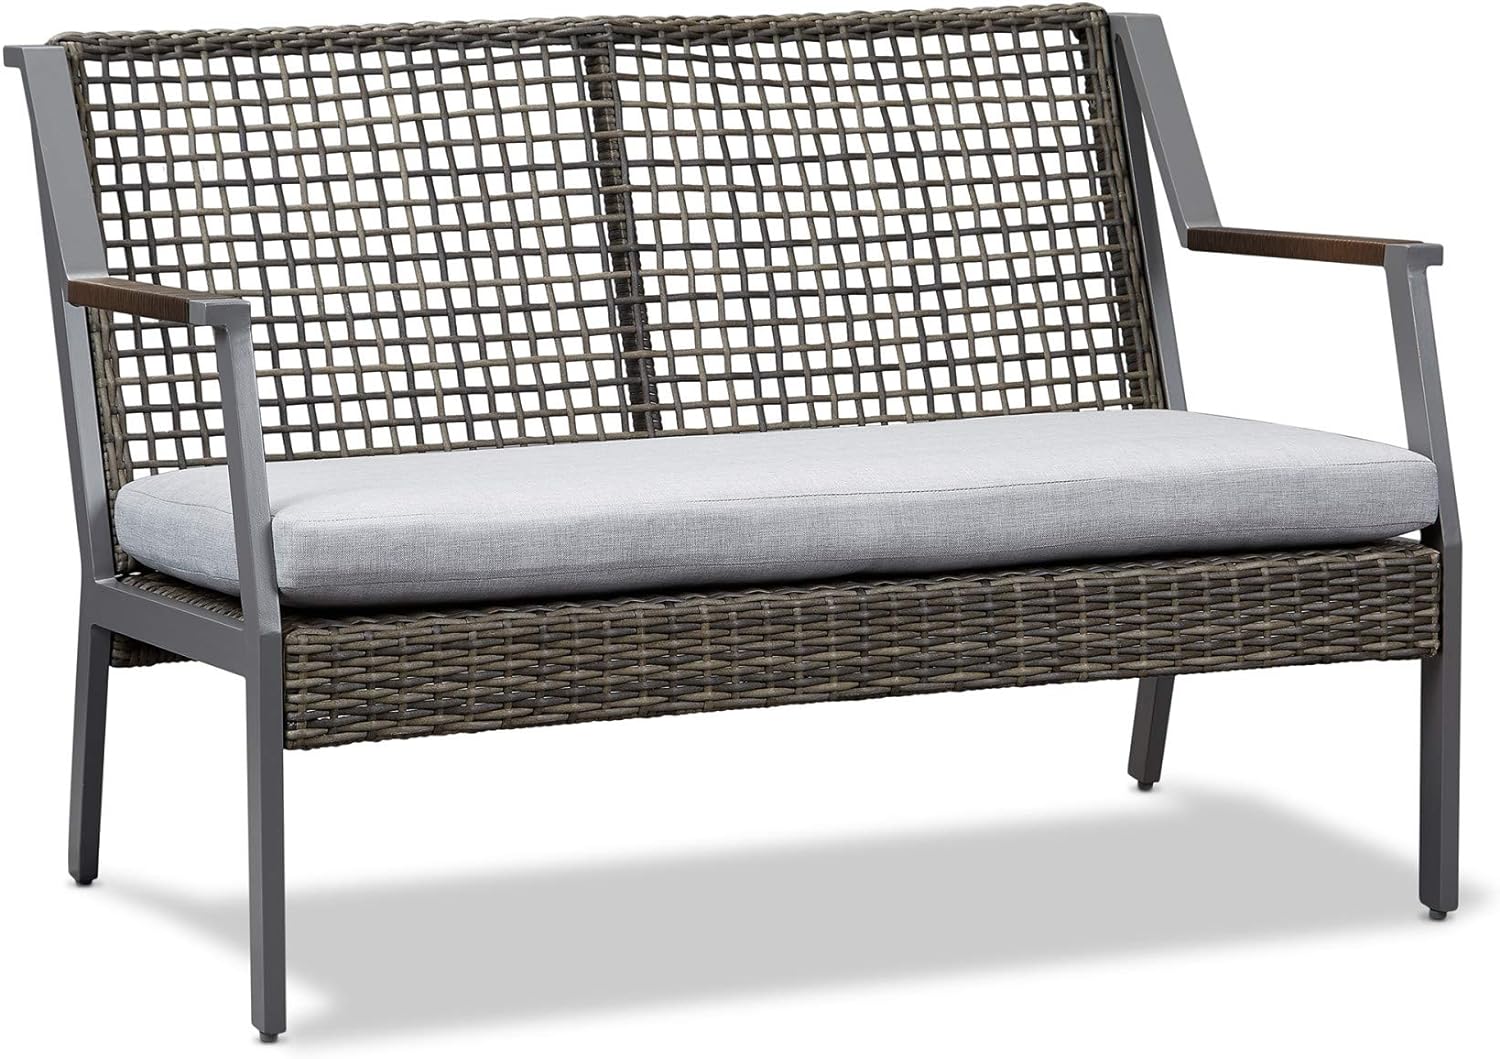 Real Flame Store Calvin Loveseat in Gray by Real Flame